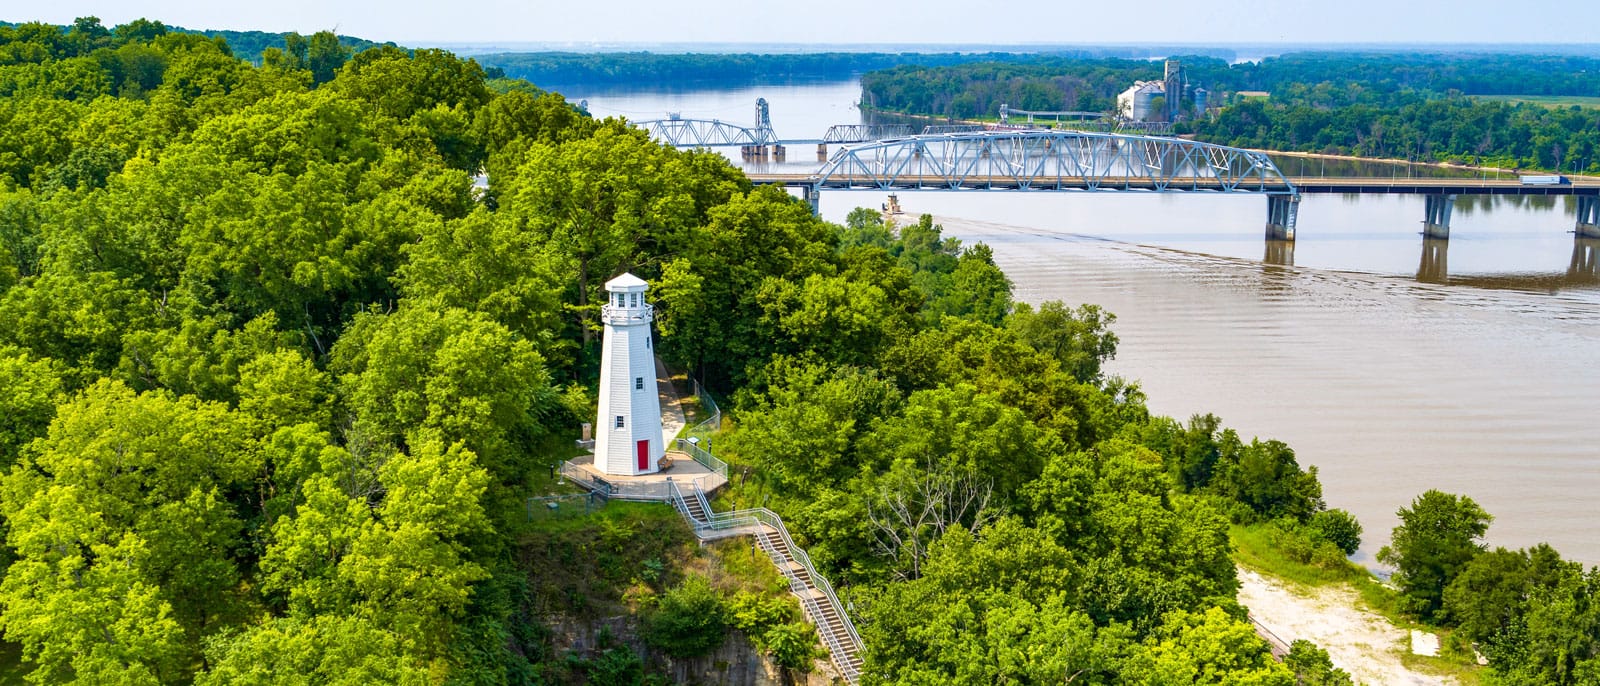 Lighthouse and trees on Mississippi River with bridge across river in background